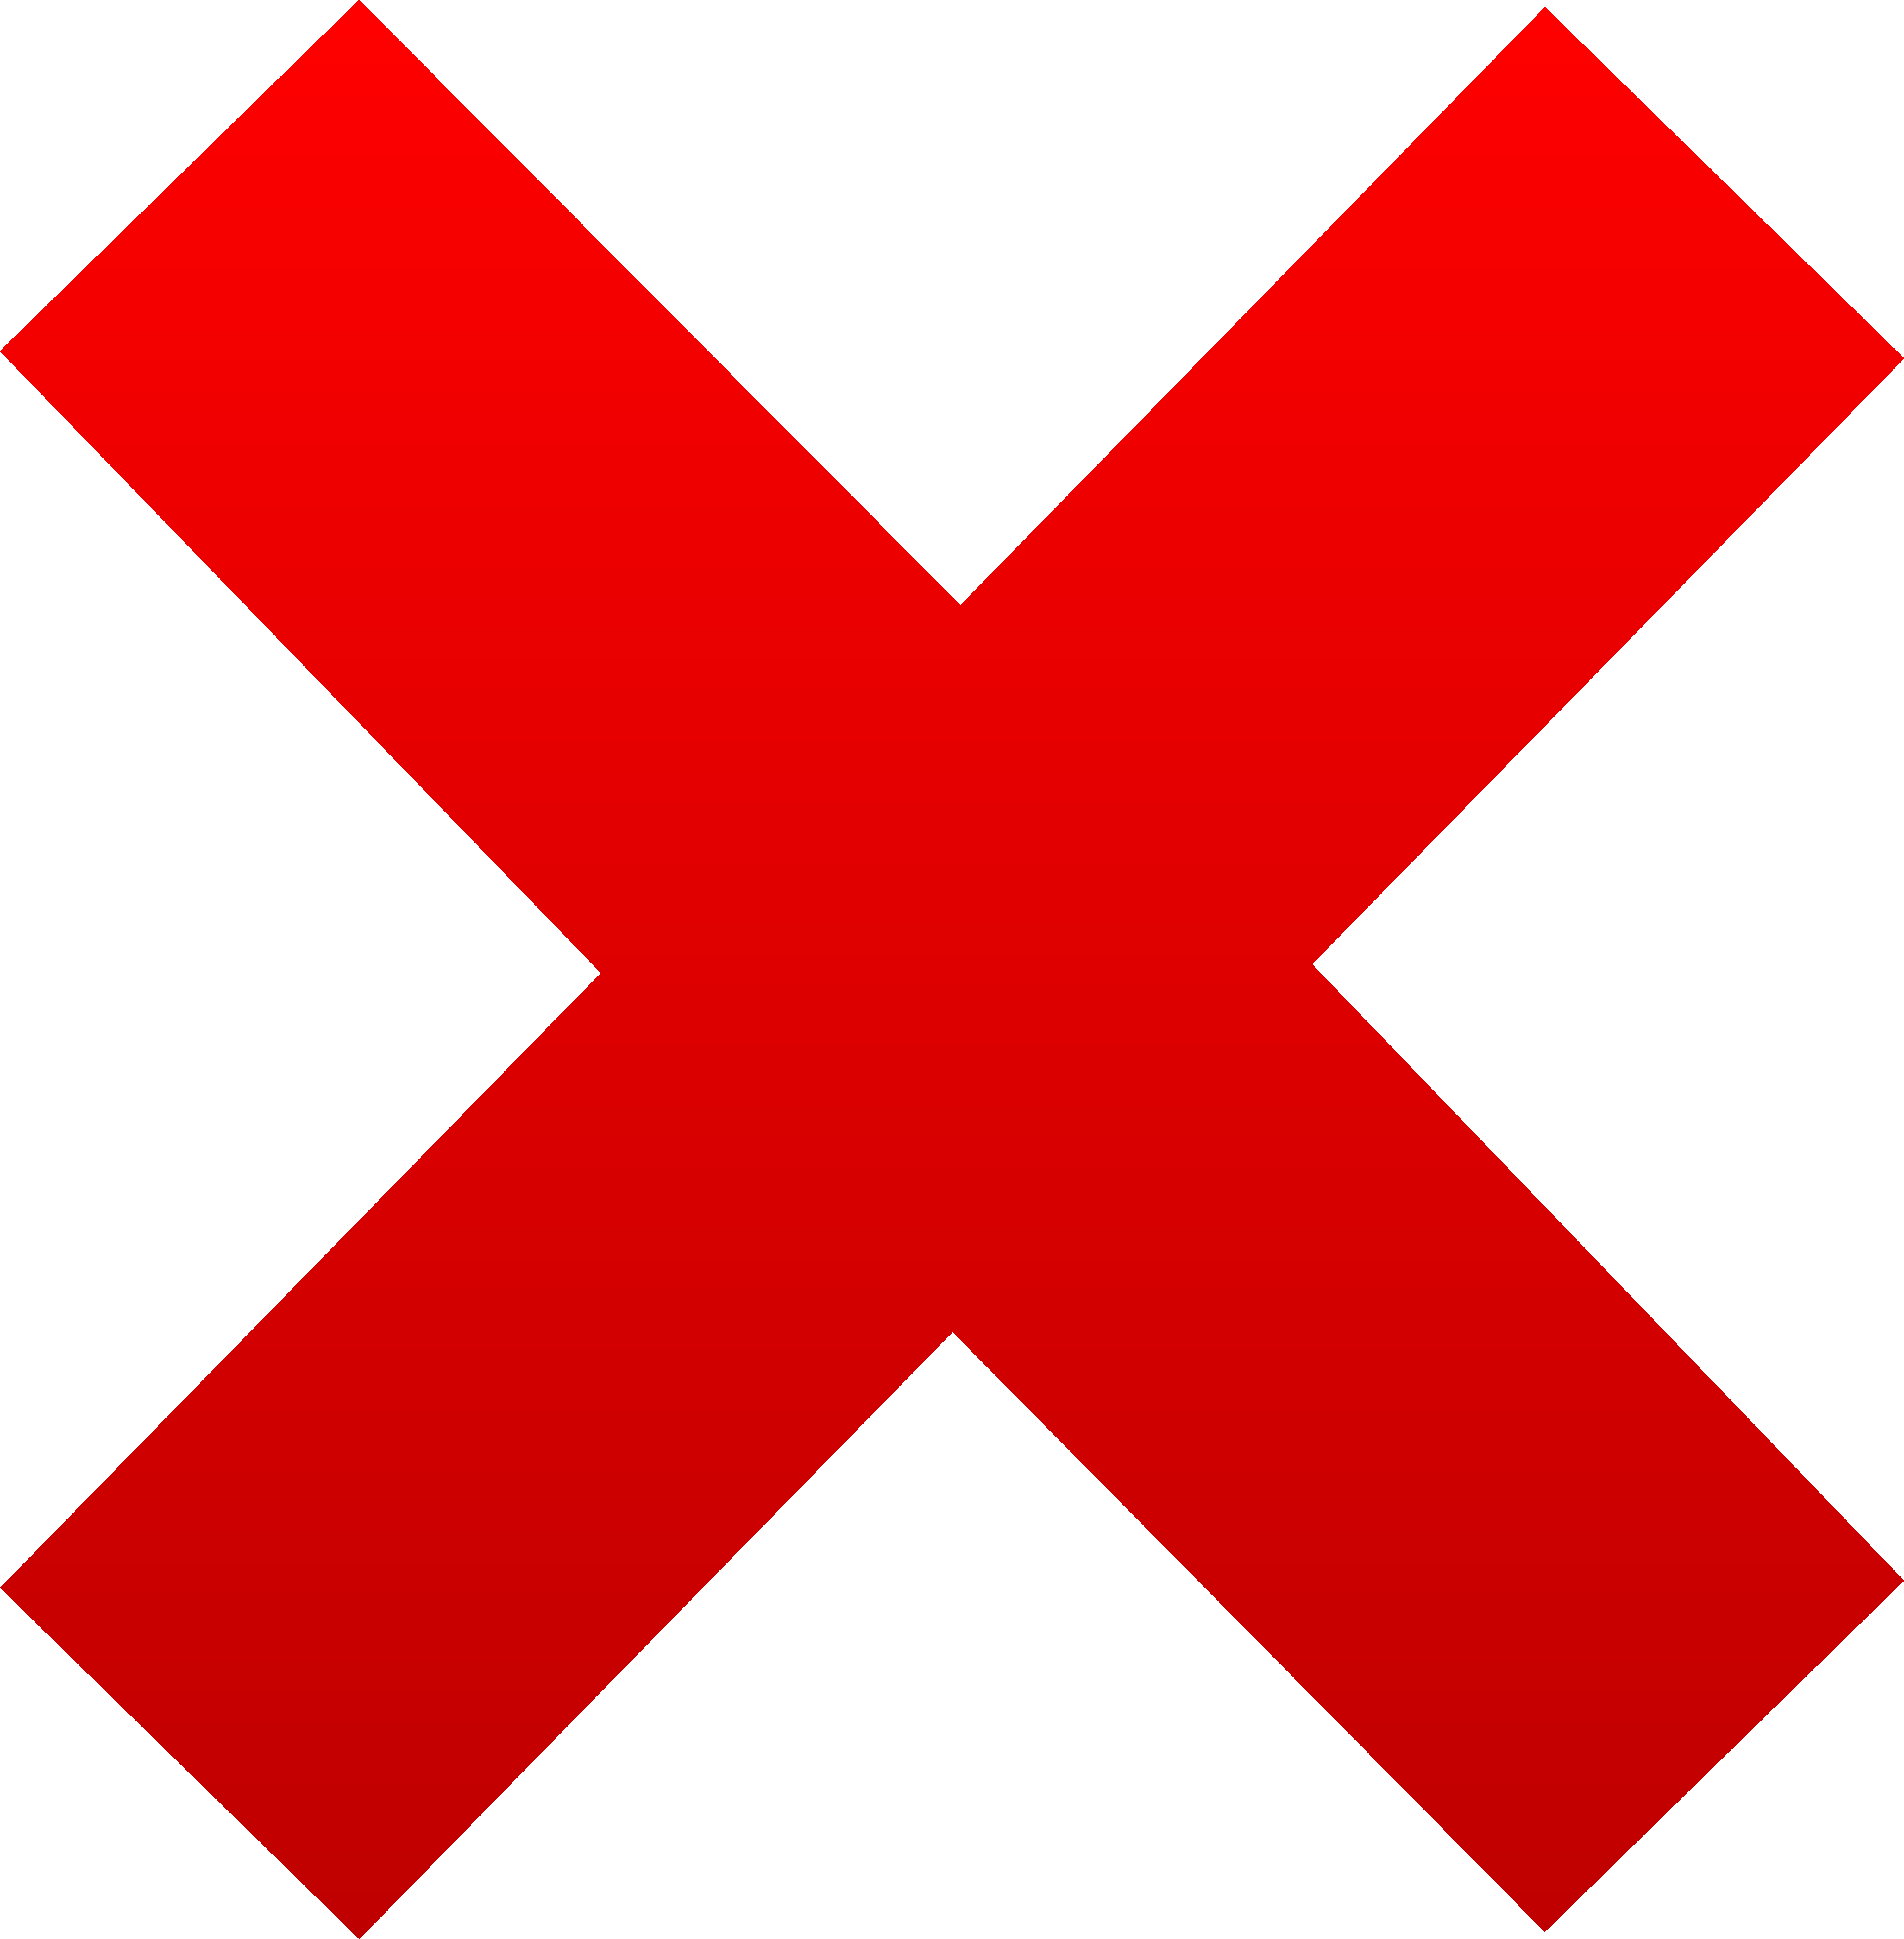 red x clipart